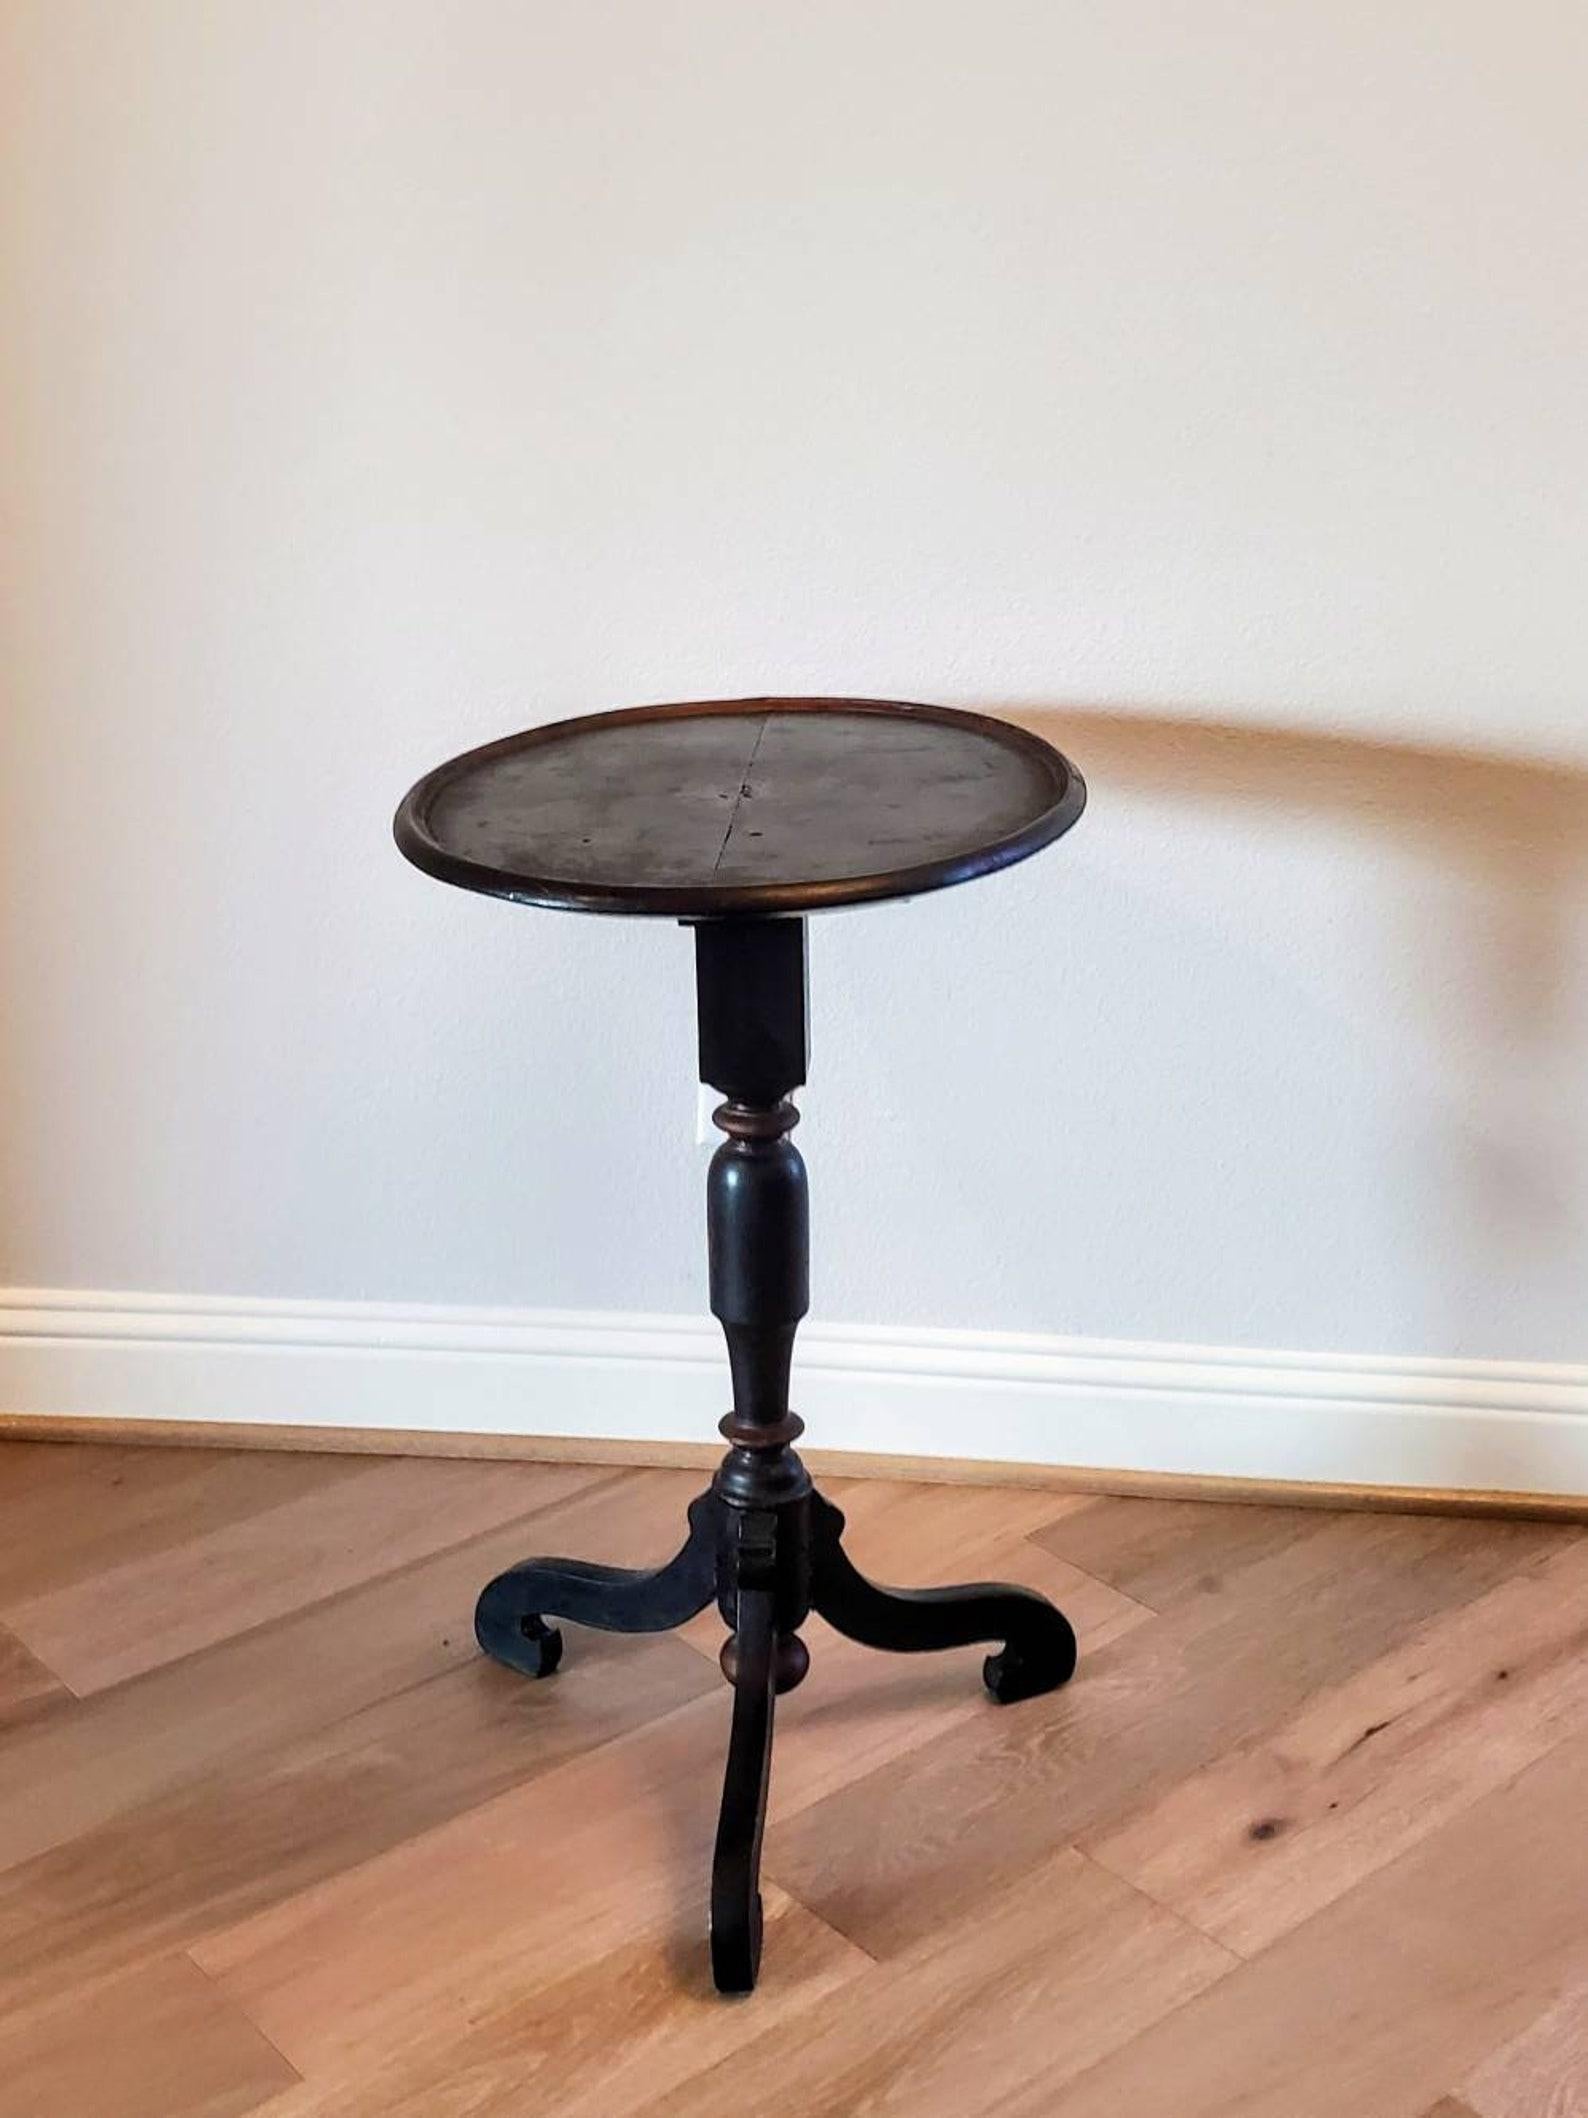 Leather Early 19th Century Regency Period Tilt Top Table